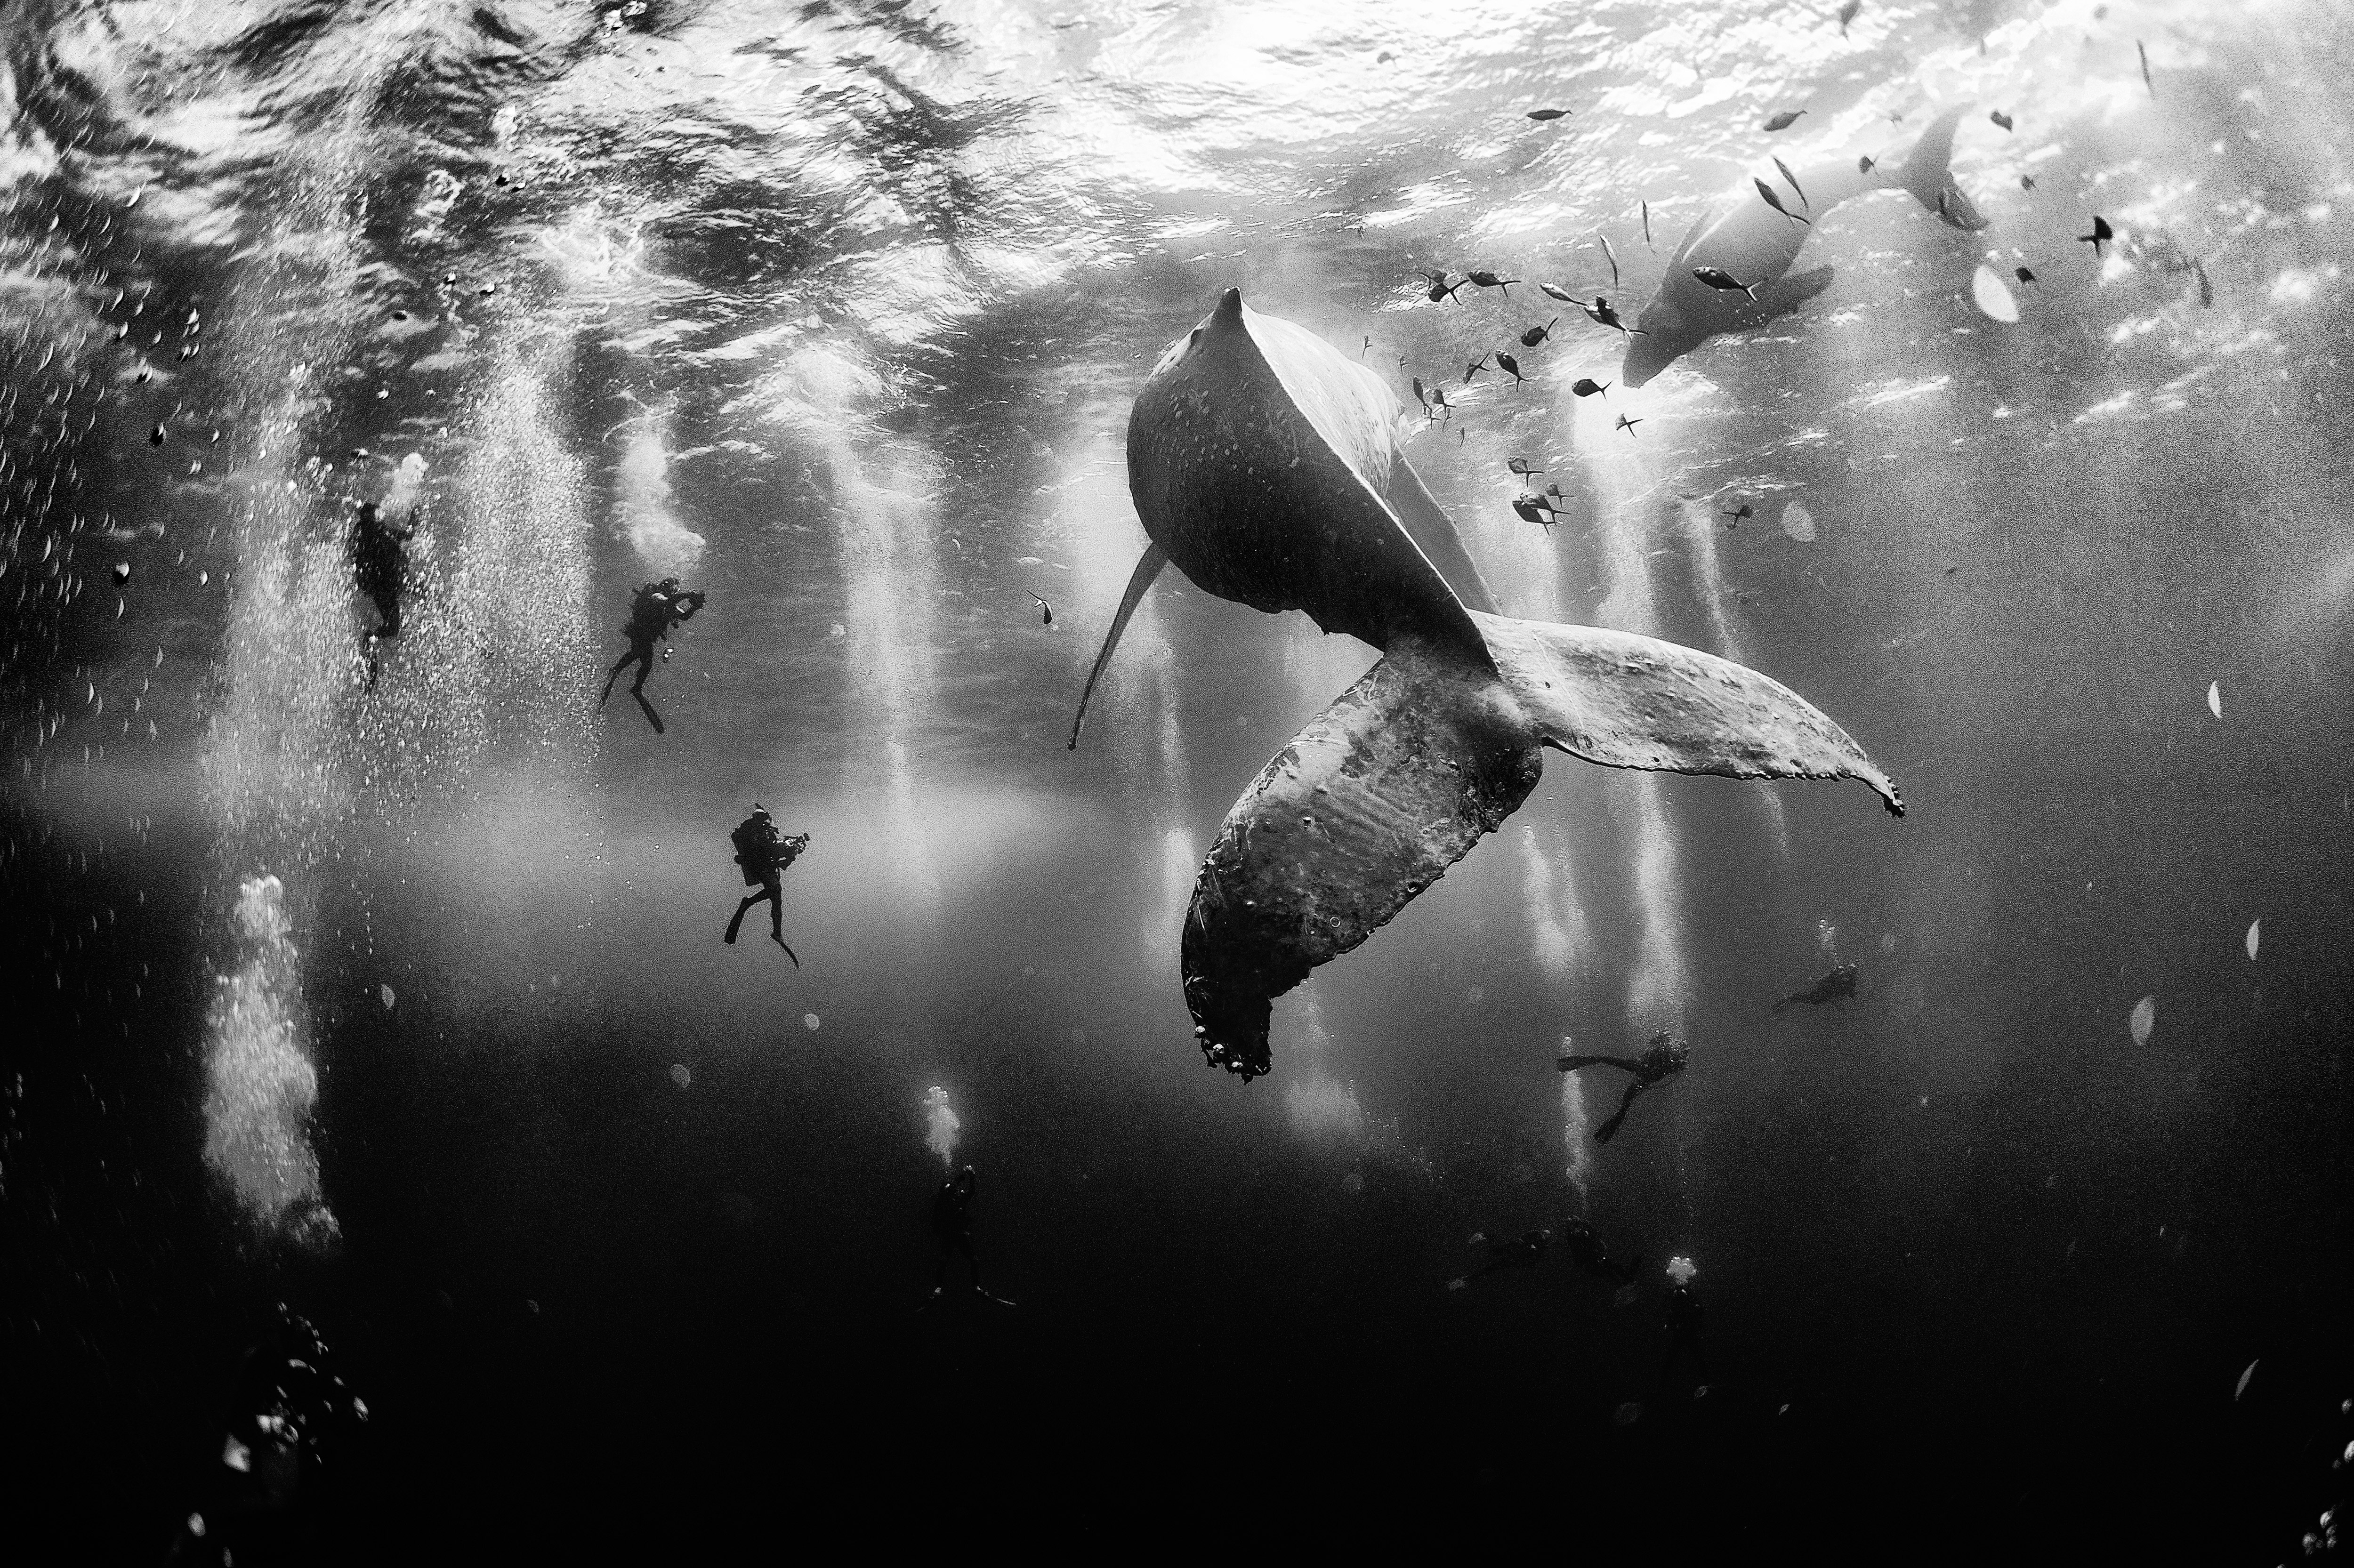 photographer, Divers, Nature, Whale, Sea, National Geographic, Underwater, Monochrome, Filming Wallpaper